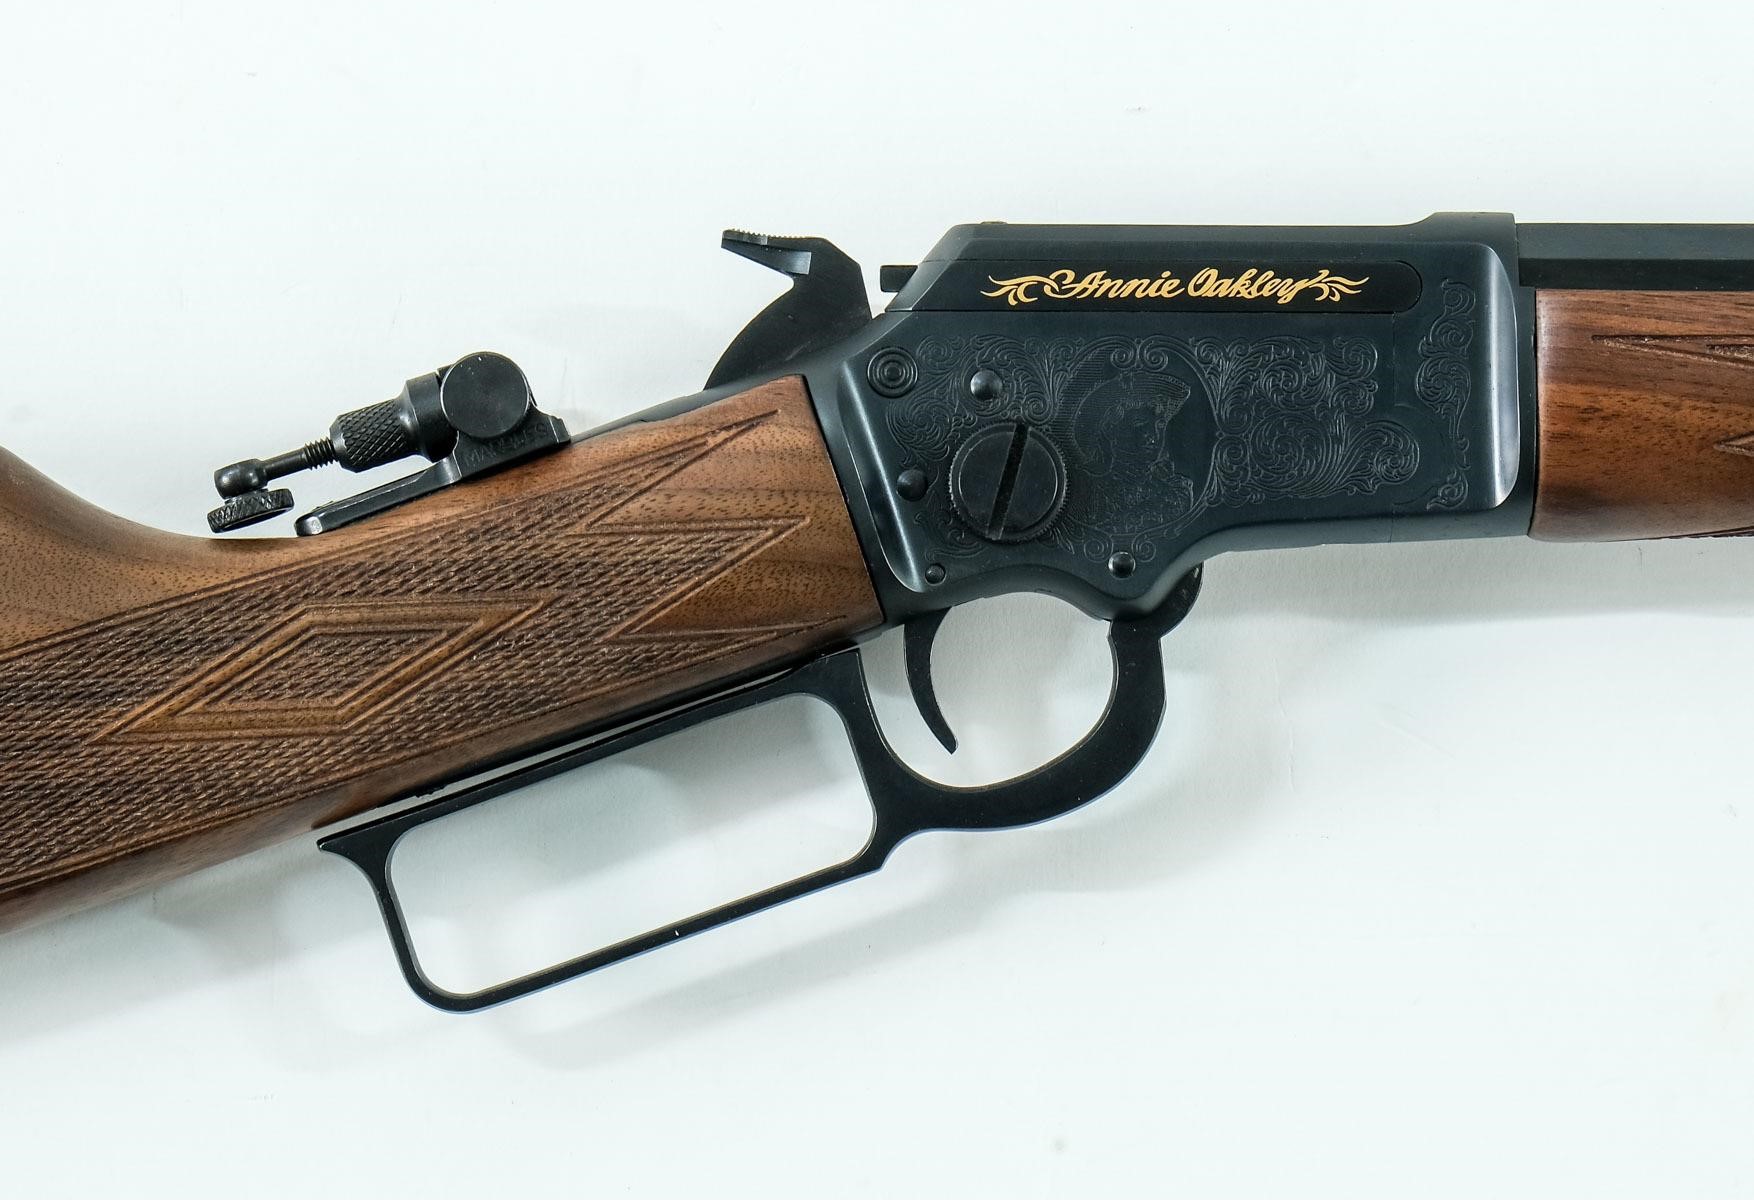 Marlin Model 1897 Annie Oakley Rifle | Nest Egg Auctions .